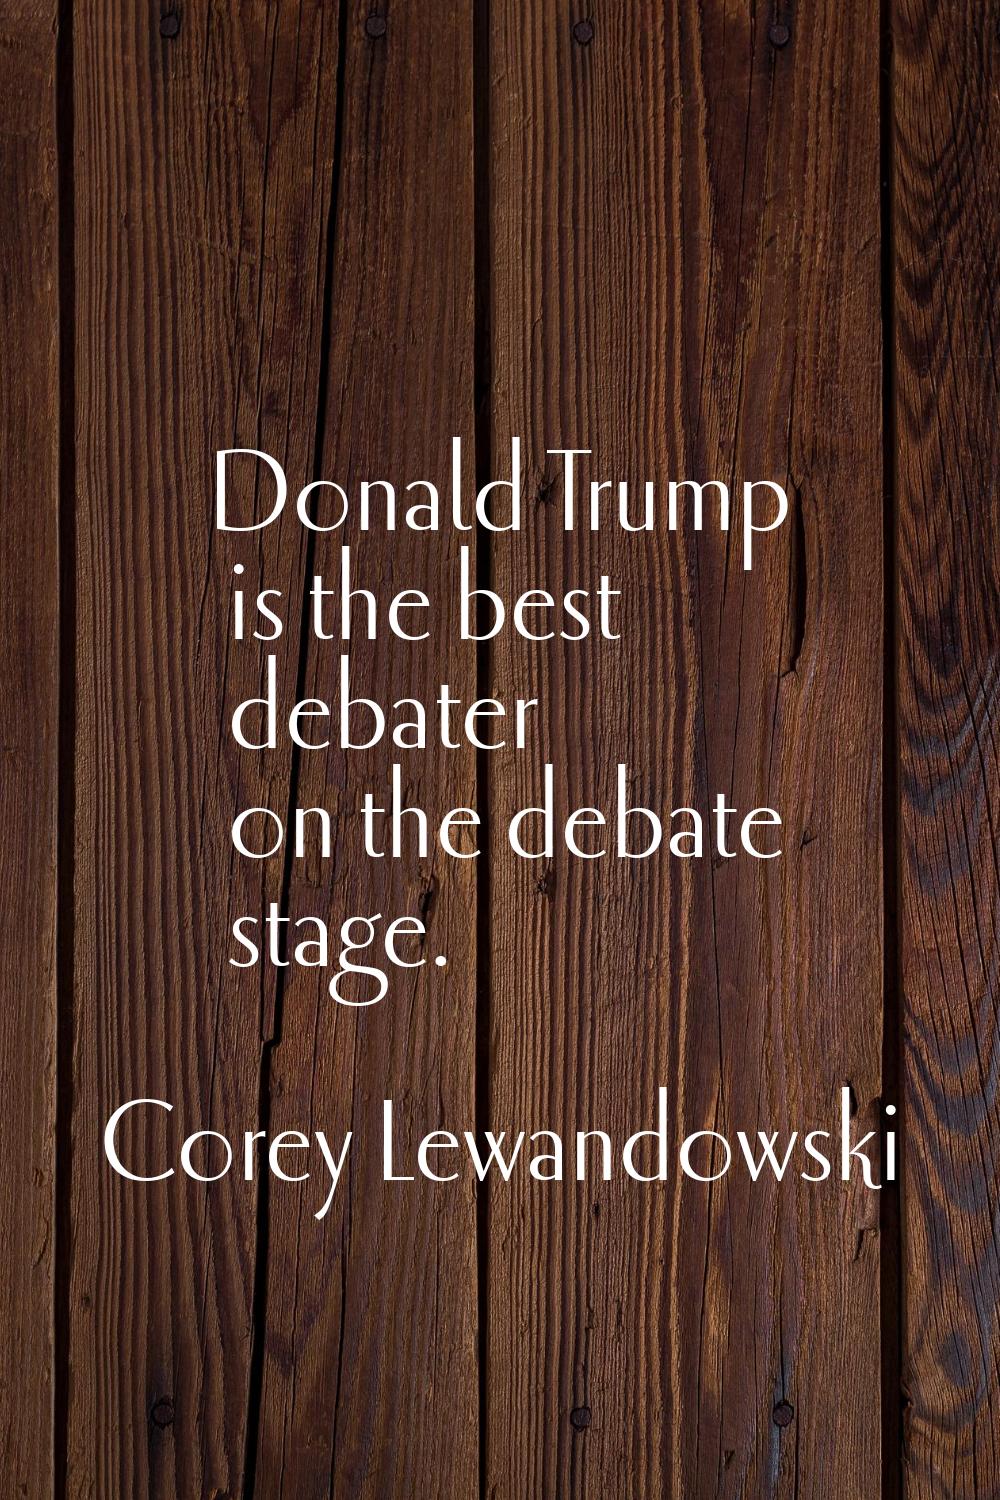 Donald Trump is the best debater on the debate stage.